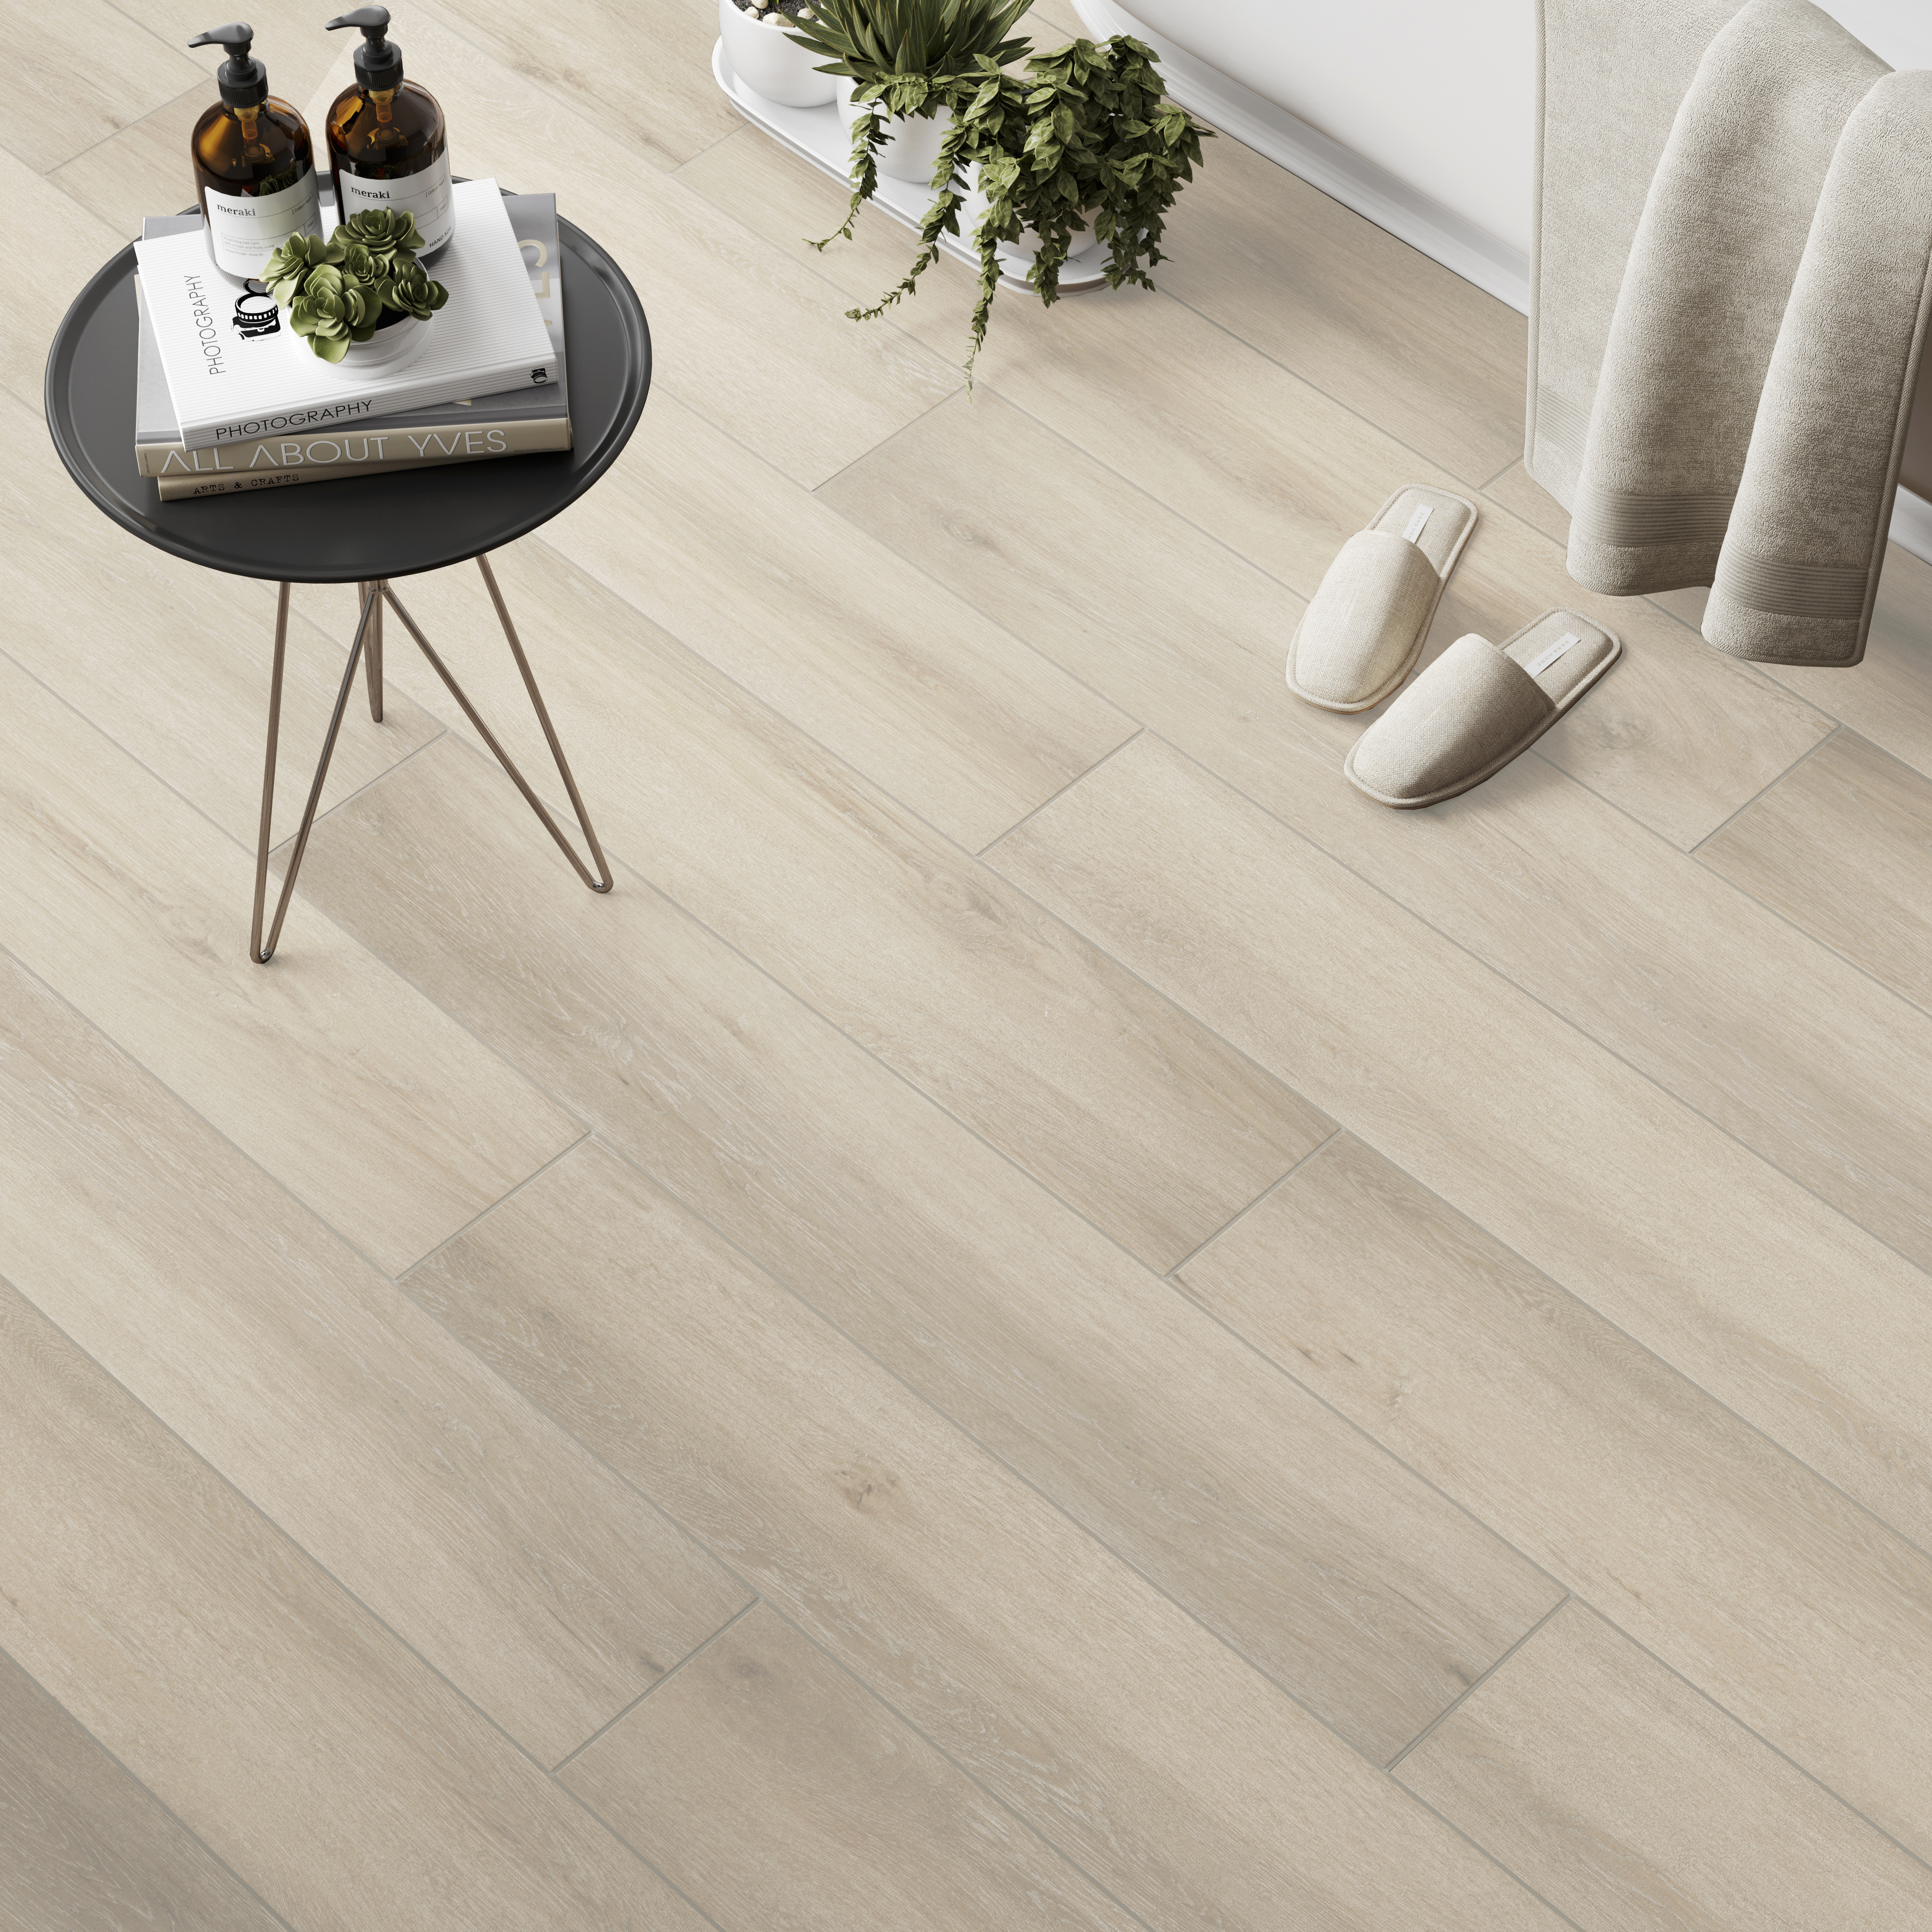 Image of Wickes Boutique Maryland Birch Glazed Porcelain Wood Effect Wall & Floor Tile - 1140 x 200mm